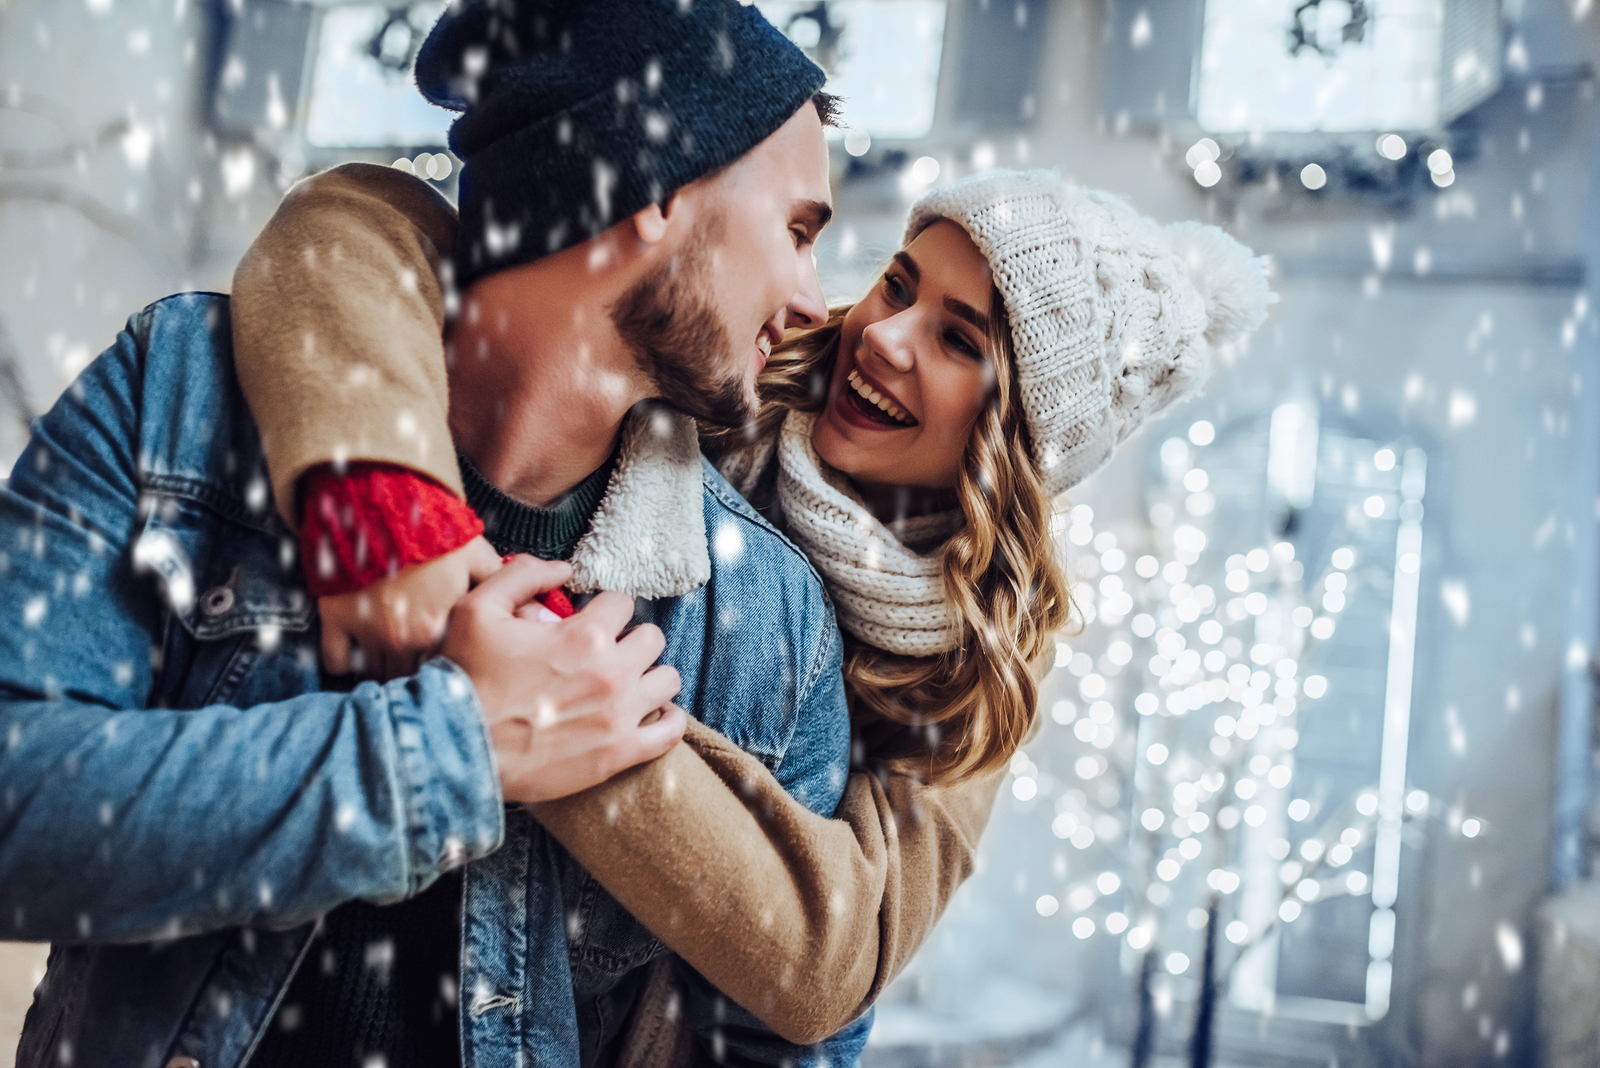 winter bucket list - couple hugging in winter clothes with sparkly snowflakes around them